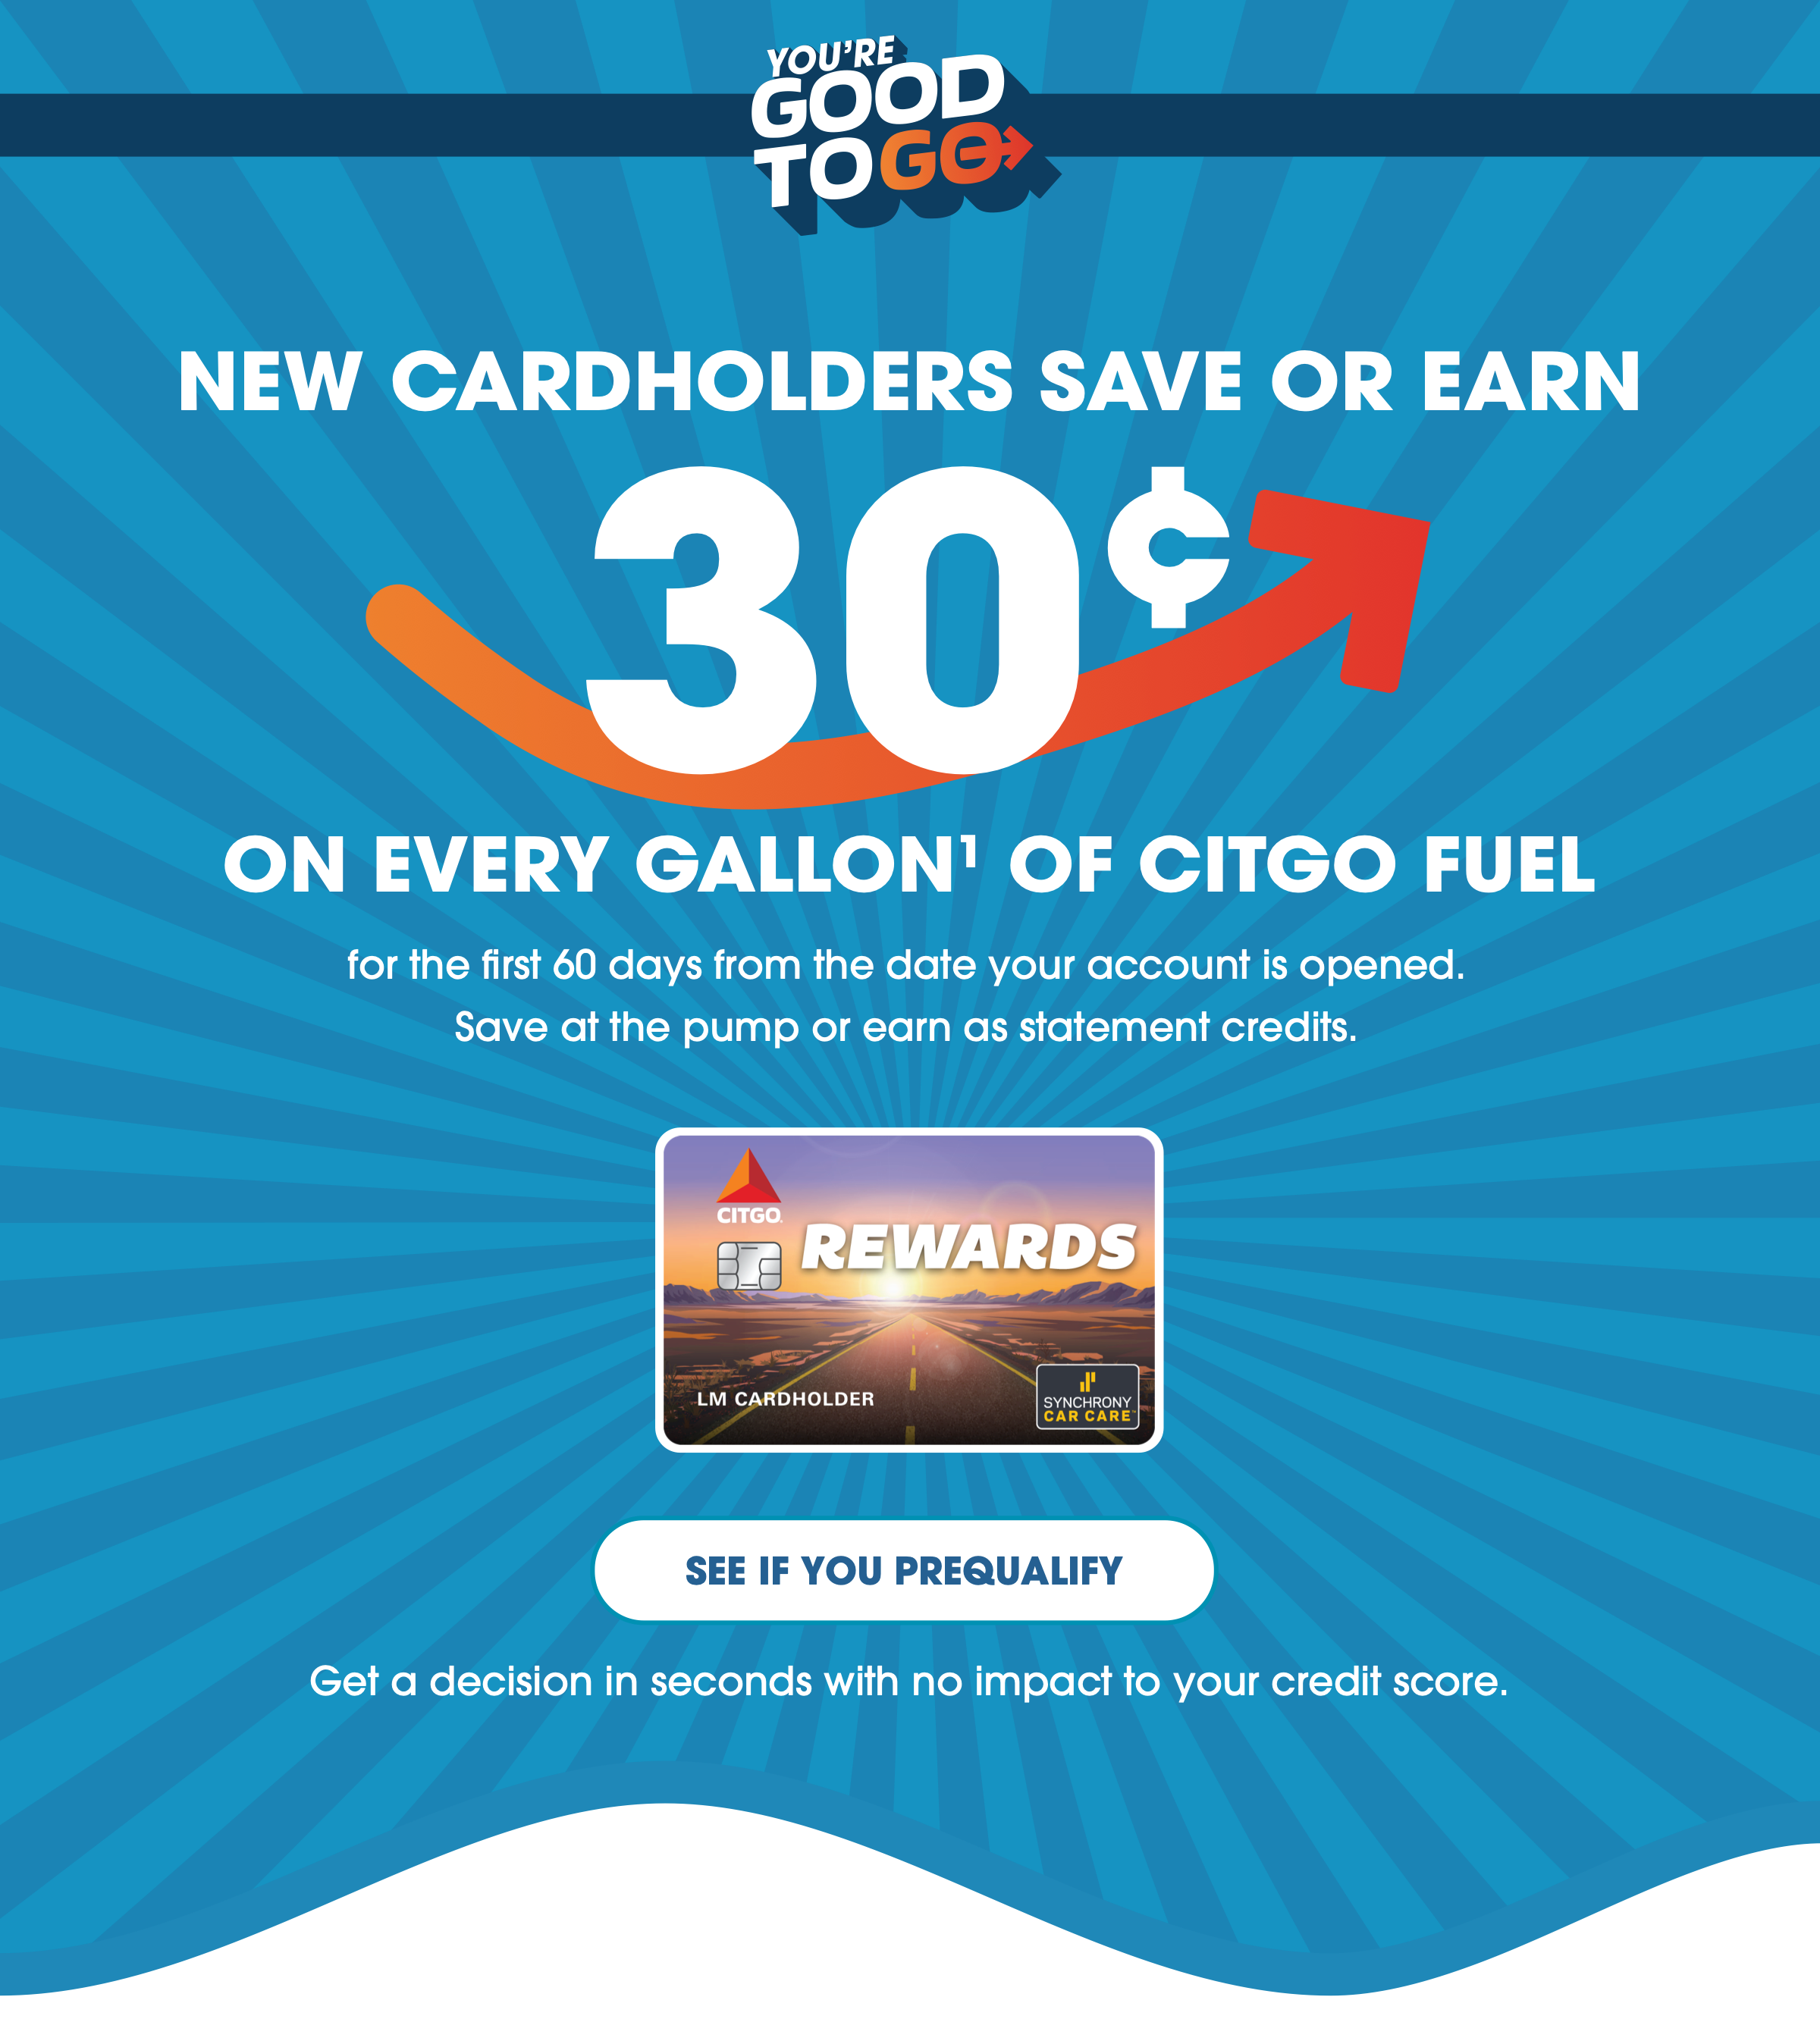 YOU'RE GOOD TO GO - NEW CARDHOLDERS SAVE OR EARN 30¢ ON EVERY GALLON(1) OF CITGO FUEL for the first 60 days from the date your account is opened. Save at the pump or earn as statement credits. SEE IF YOU PREQUALIFY - Get a decision in seconds with no impact to your credit score.